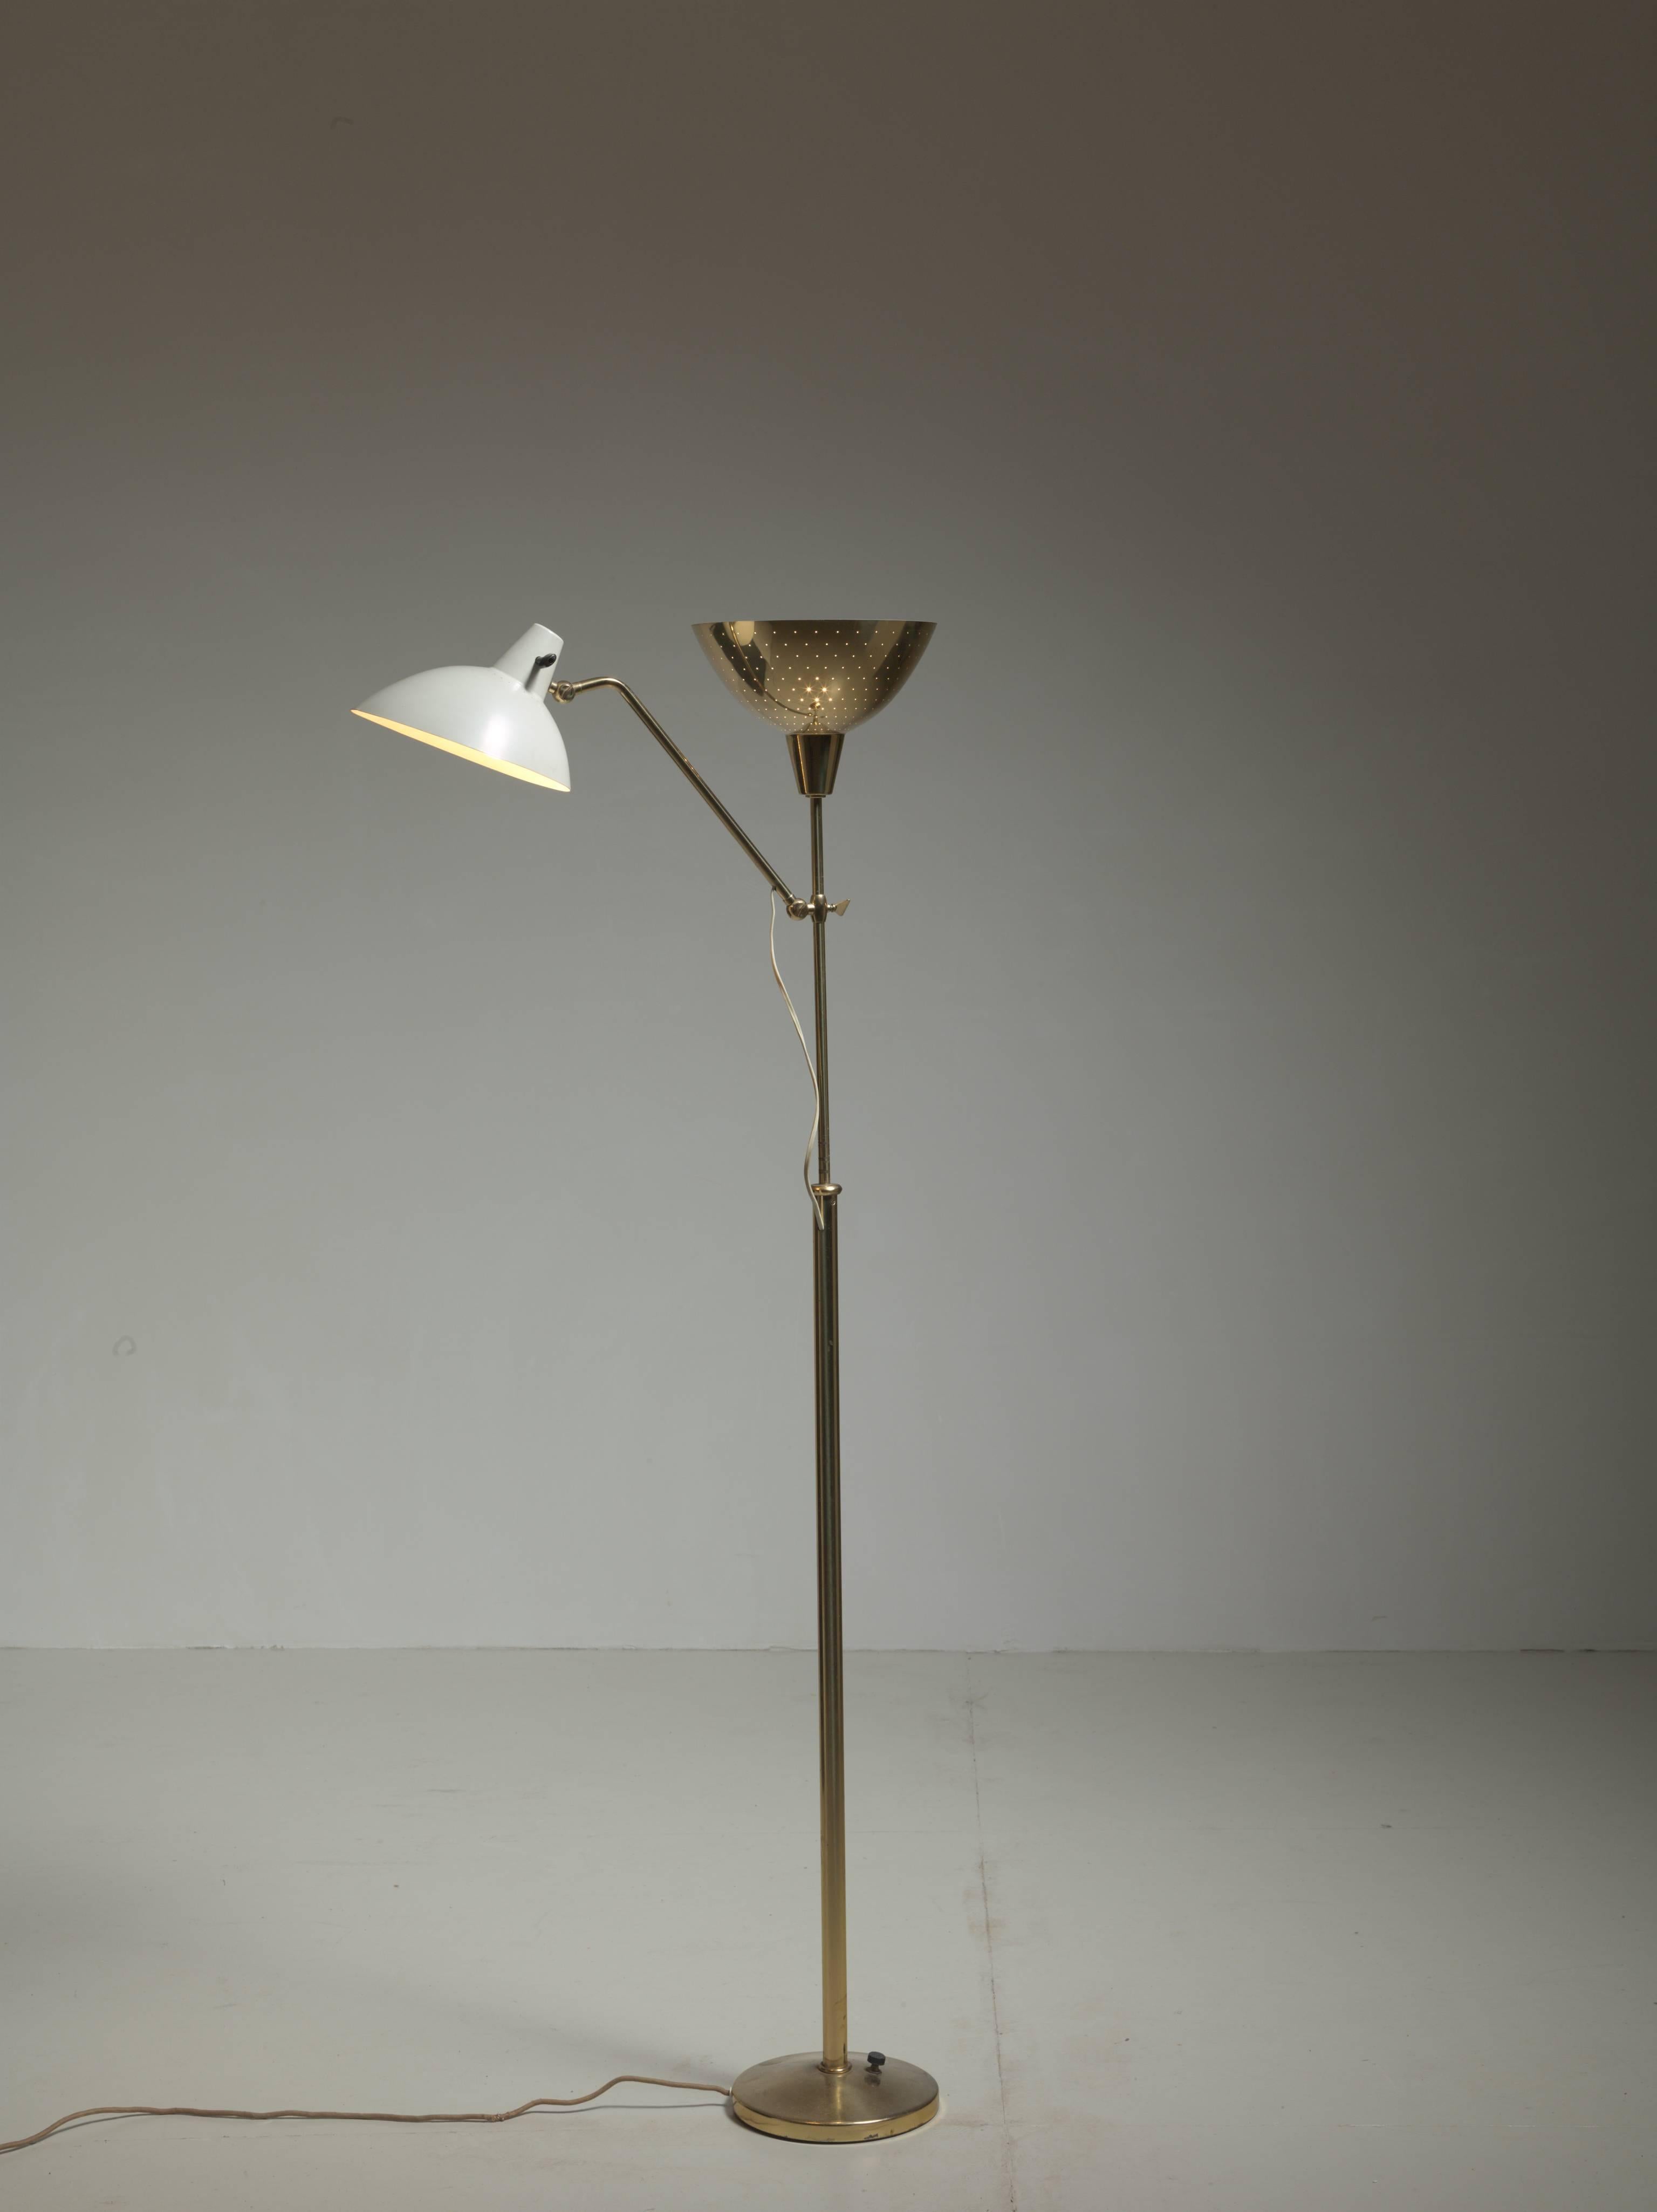 A stunning floor lamp with two shades, one brass uplighter and a height-adjustable shade of white lacquered metal. Designed by Alfred Muller for Swiss lighting company  AMBA. 
The brass shade has pin point perforations for a beautiful light